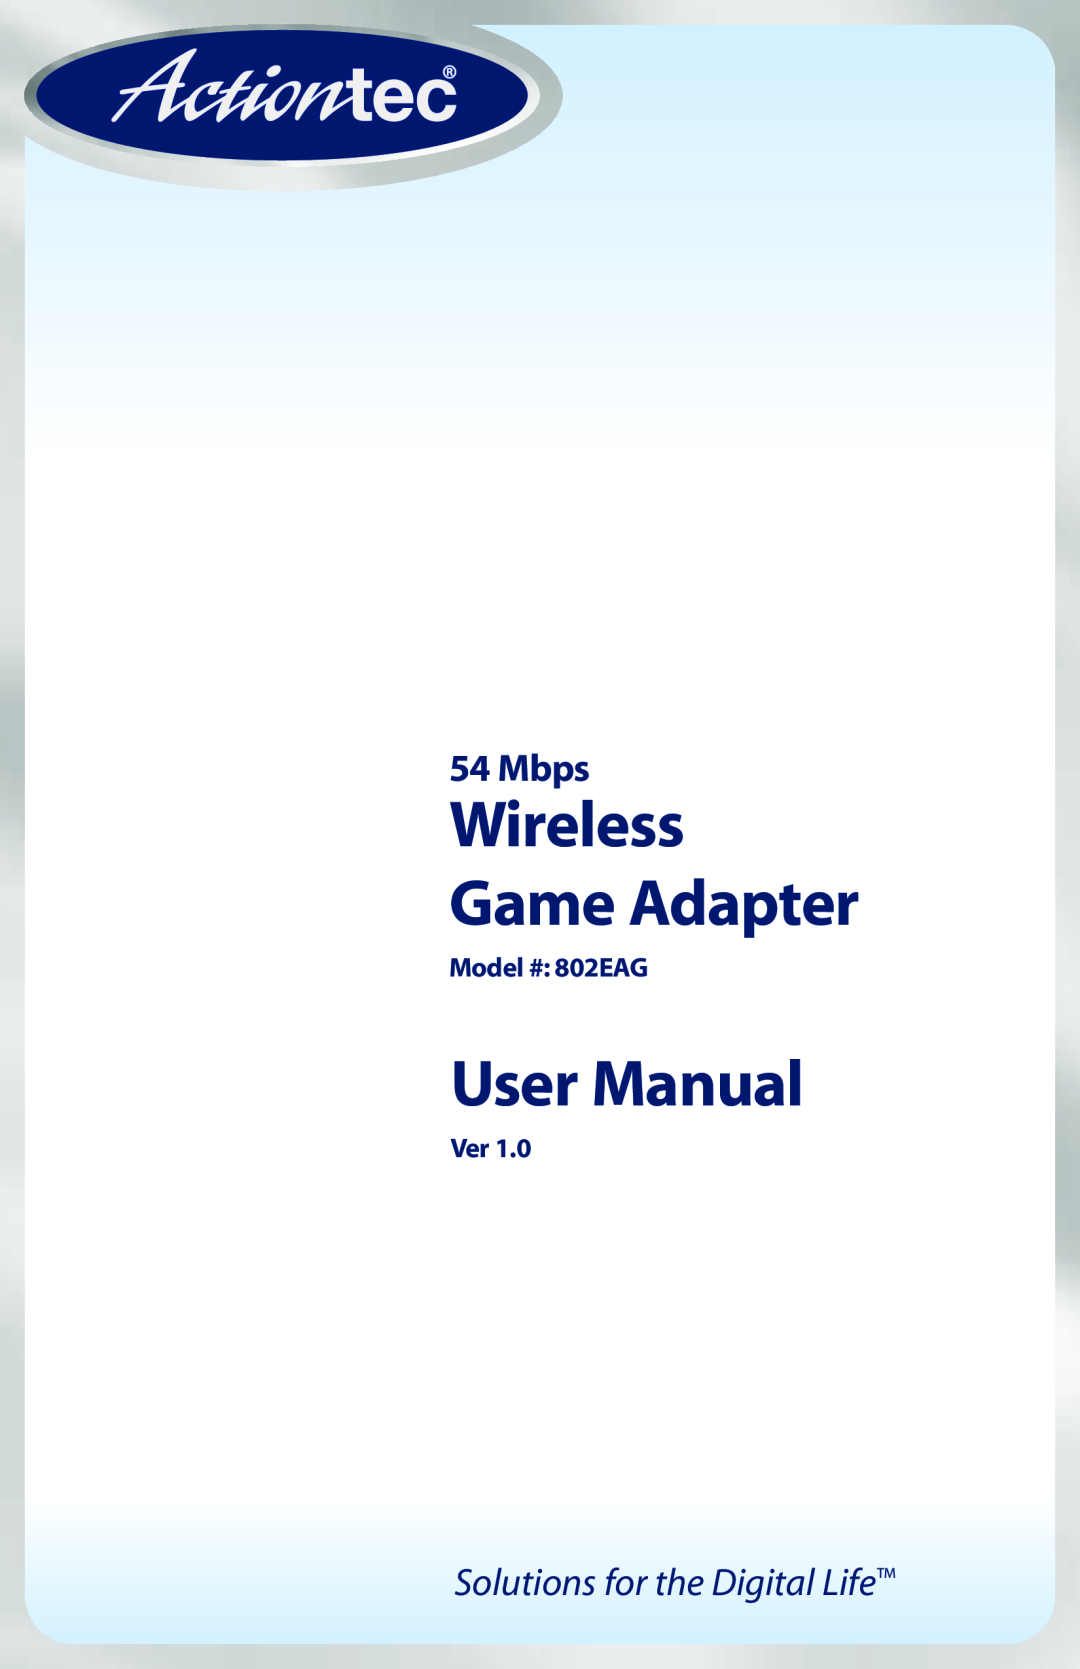 Actiontec electronic 802EAG user manual Wireless Game Adapter, User Manual, Mbps, Solutions for the Digital Life 